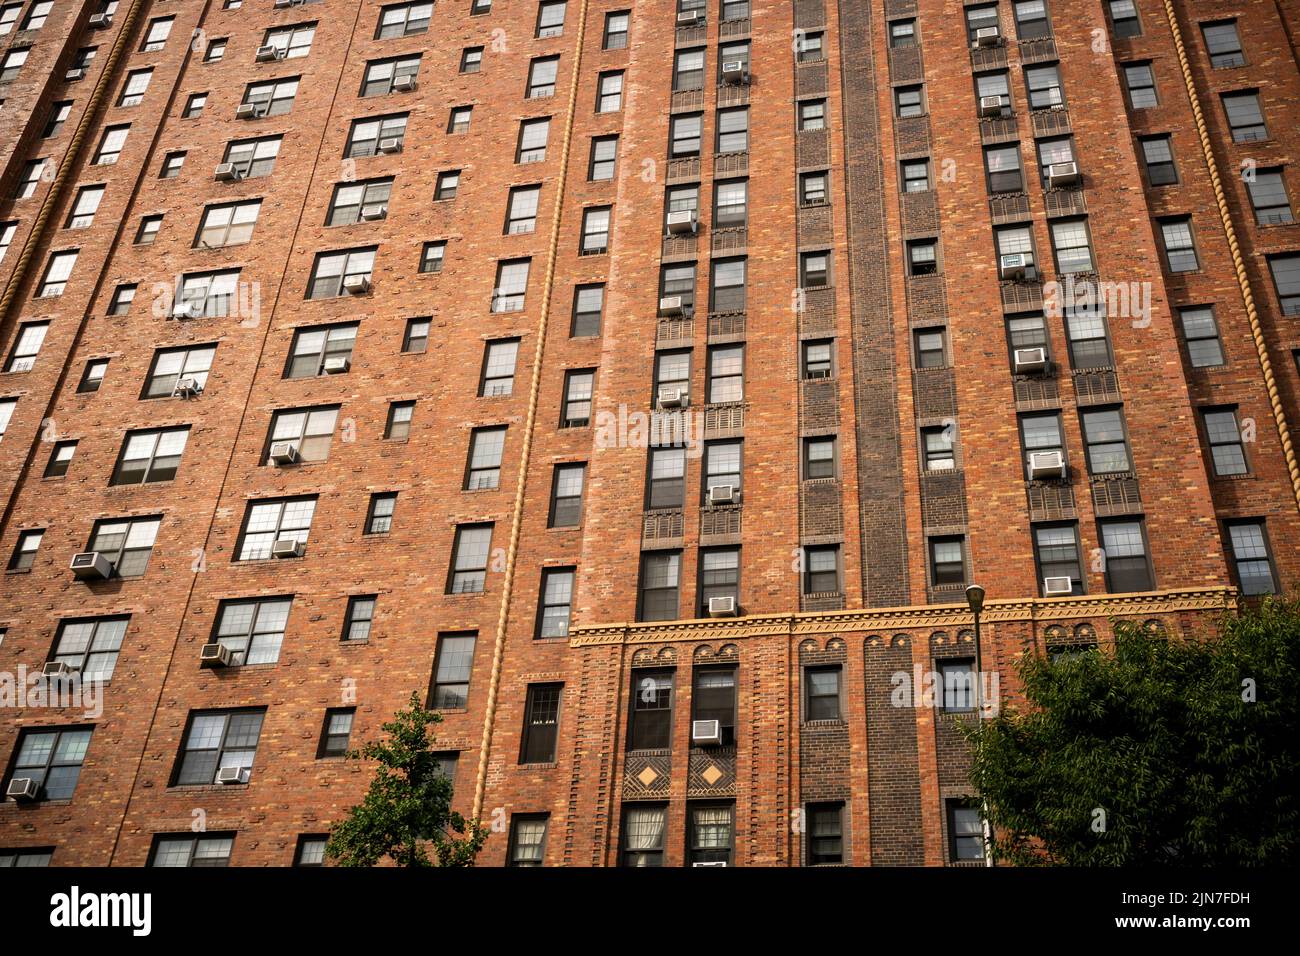 Housing stock in Chelsea in New York on Tuesday, July 26, 2022. The pandemic deals offered by landlords are largely over as rents go up as landlords attempt to recoup income lost. (© Richard B. Levine) Stock Photo